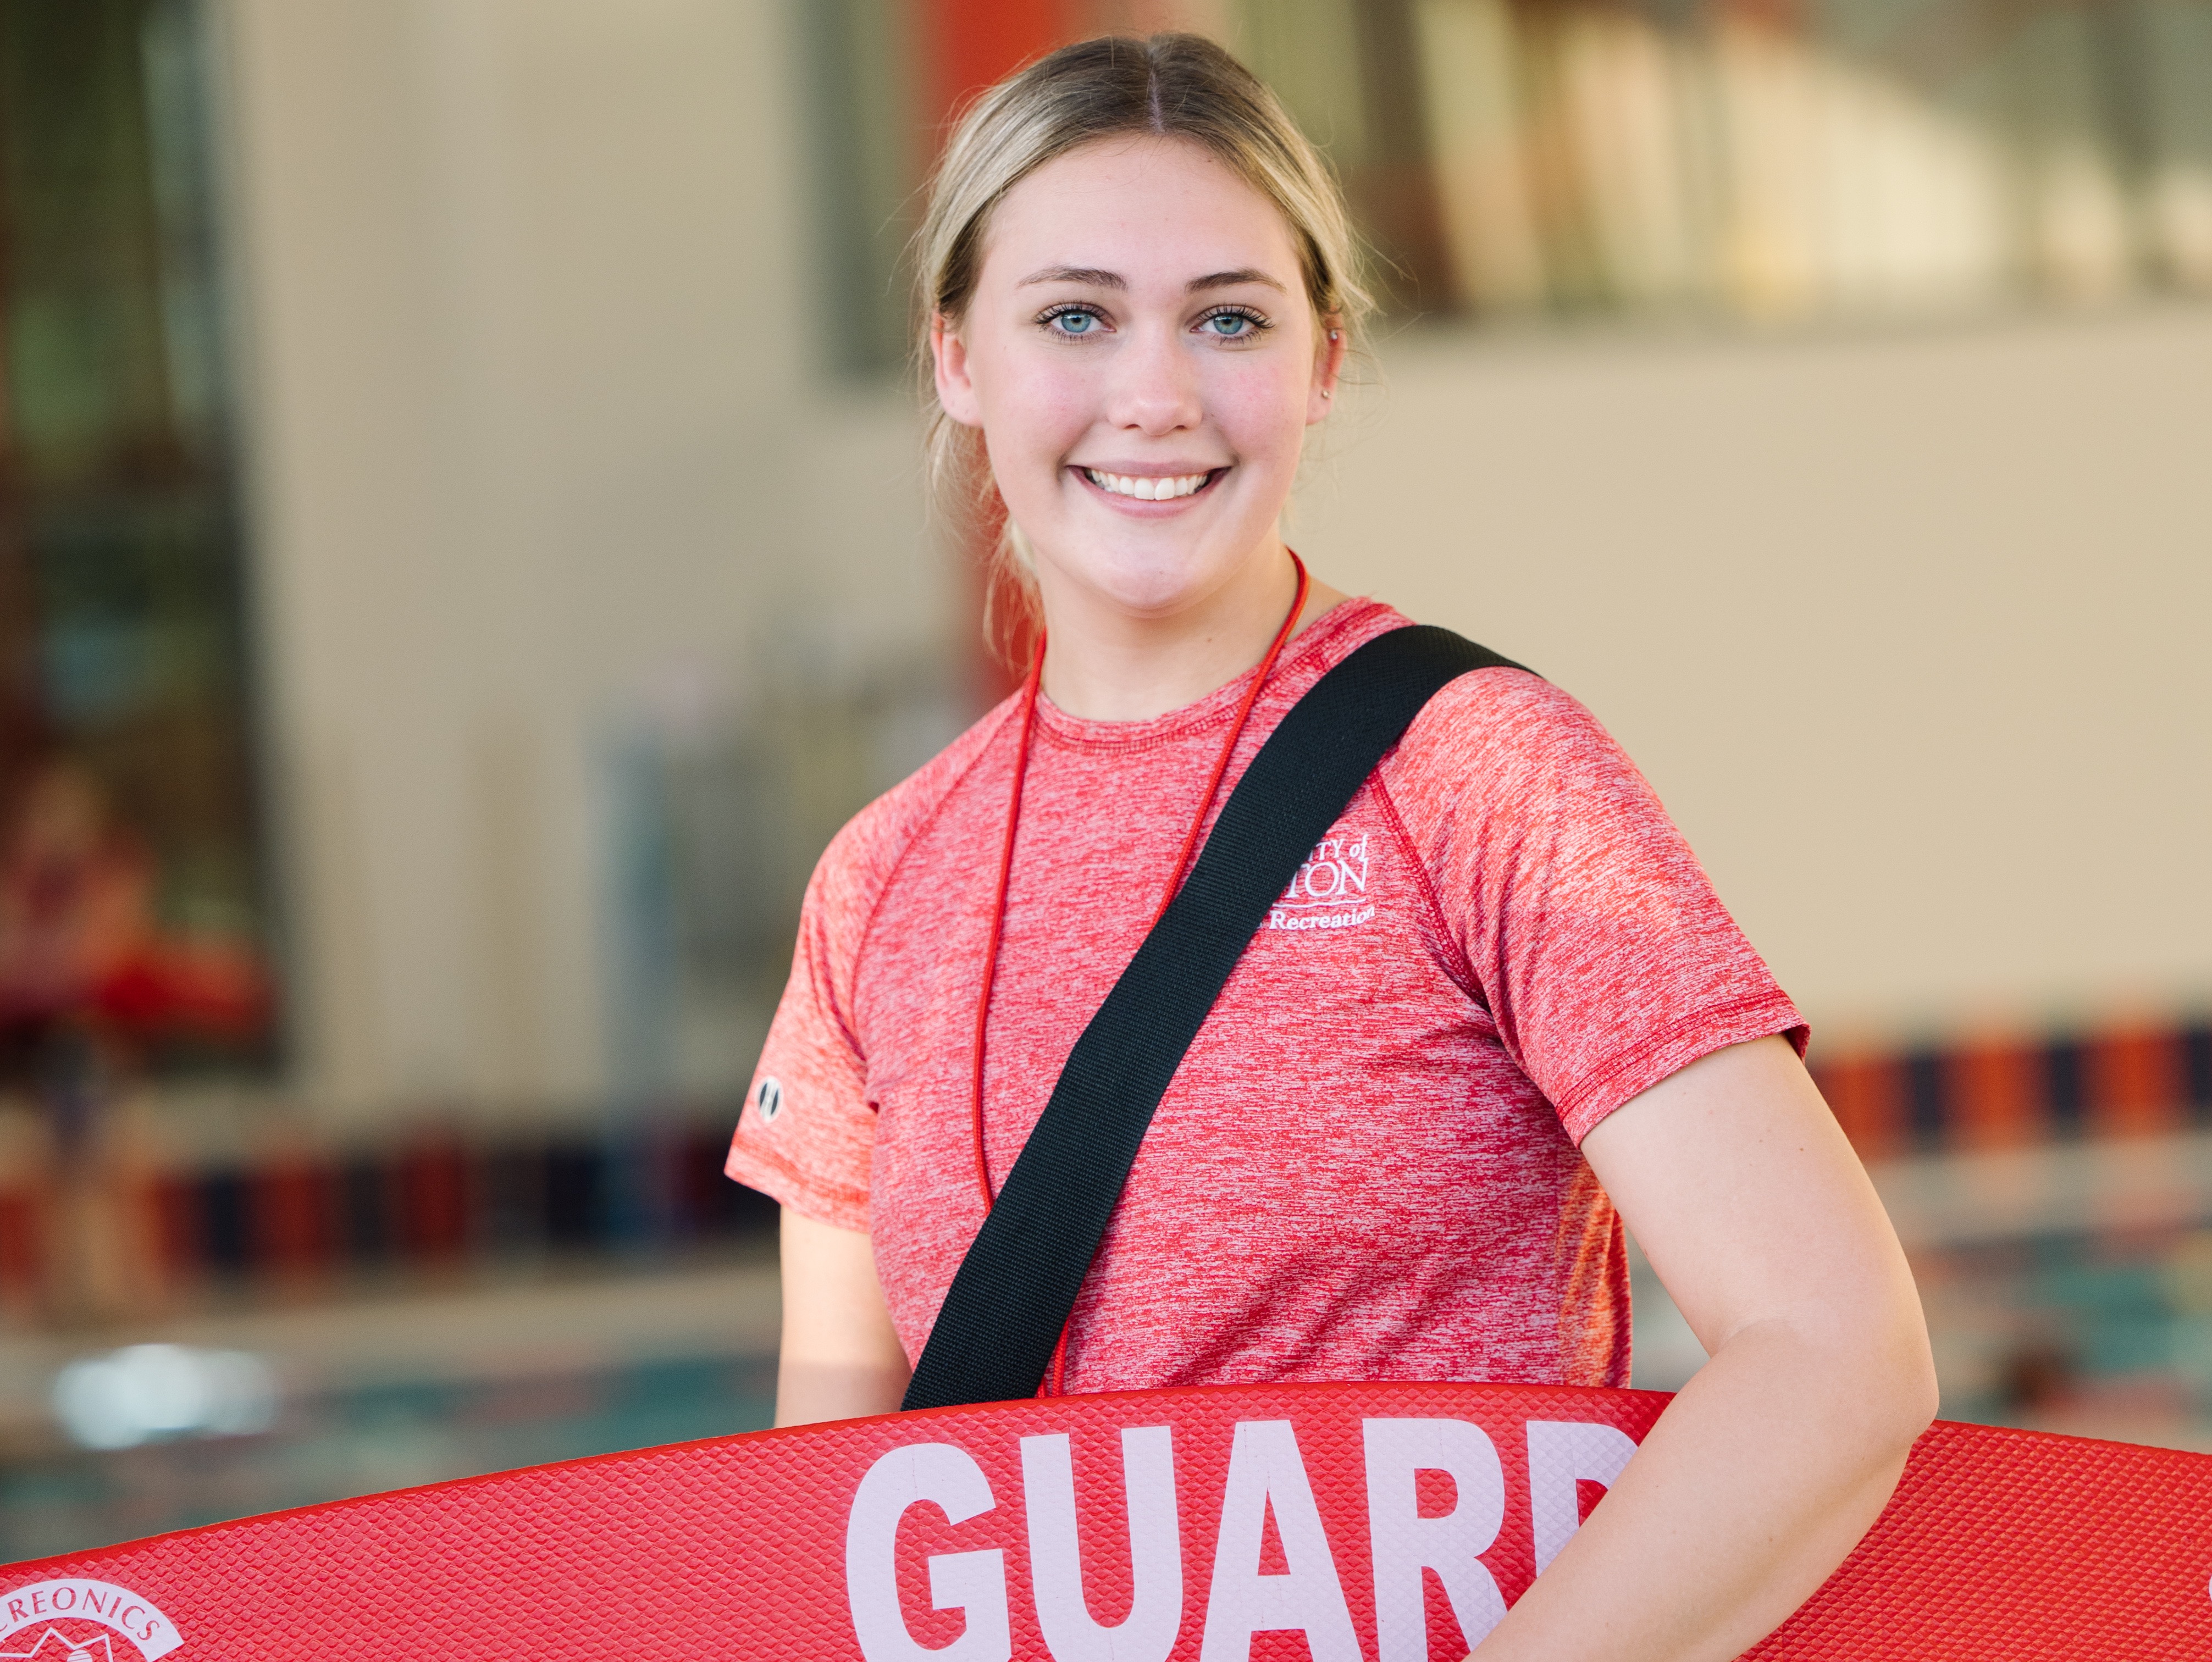 ${ A student worker in the aquatics center working as a lifeguard, with their appropriate attire and gear at hand. }